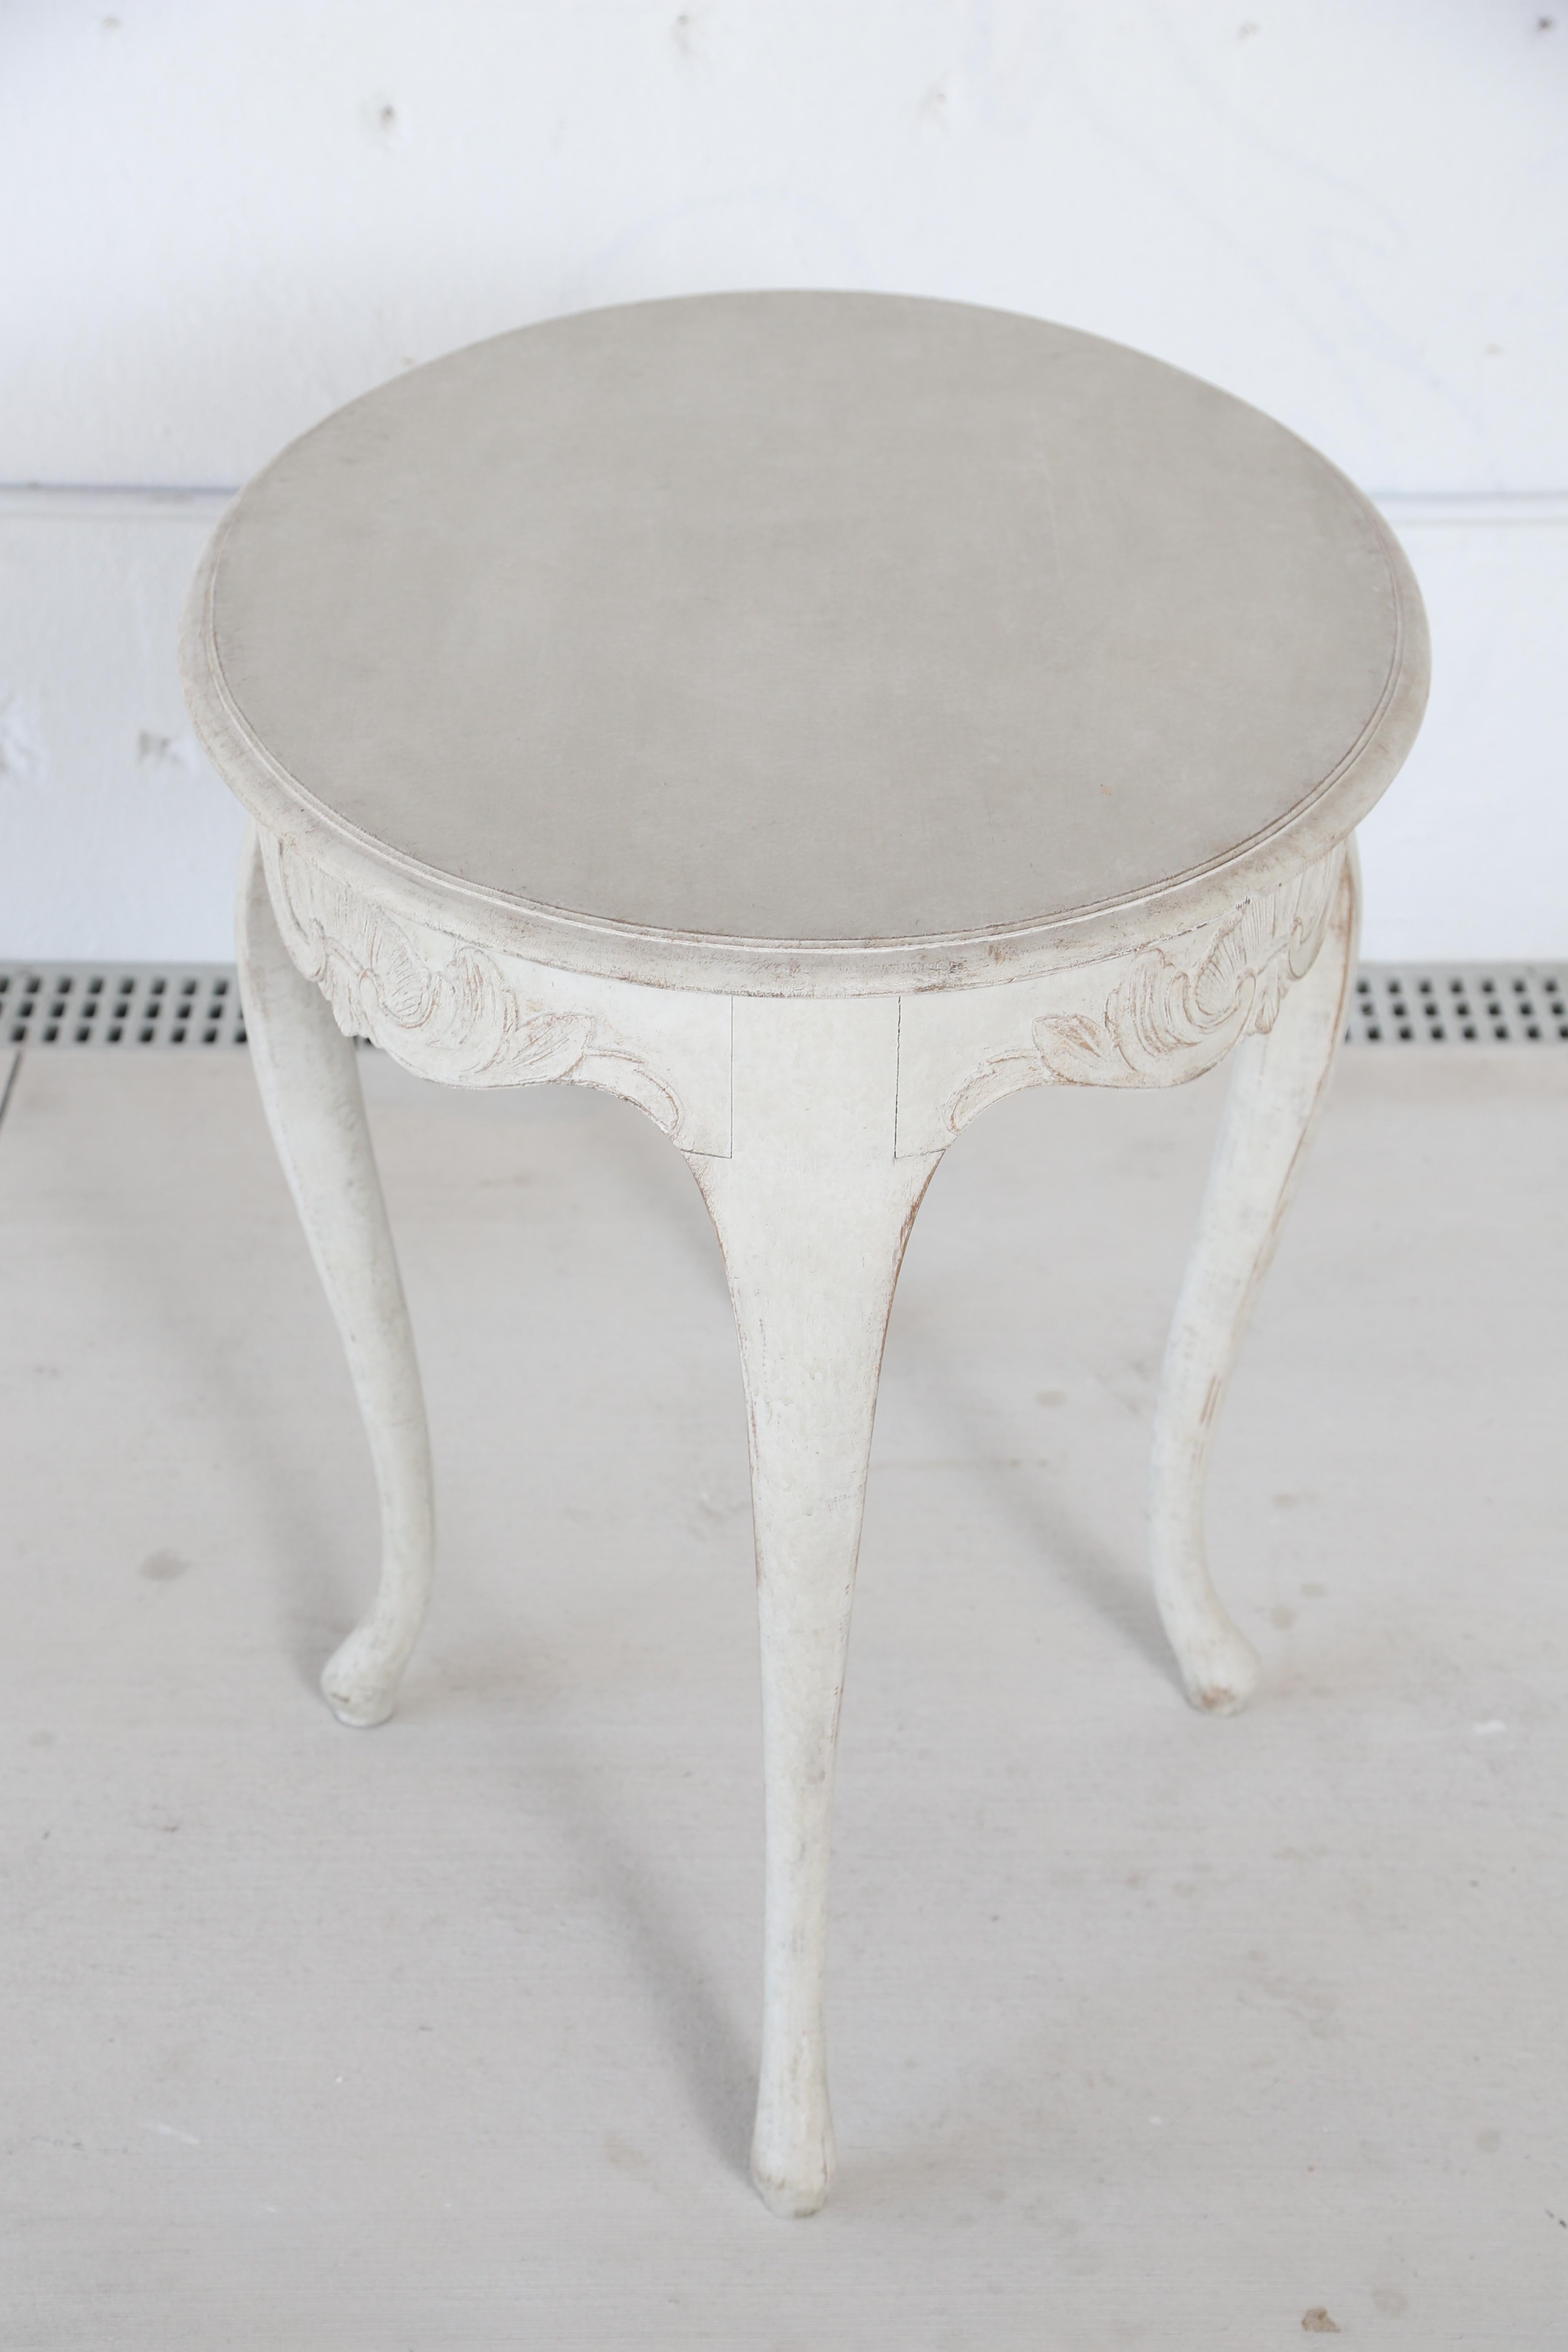 Antique Swedish Rococo Style Painted Oval Table 19th Century For Sale 5